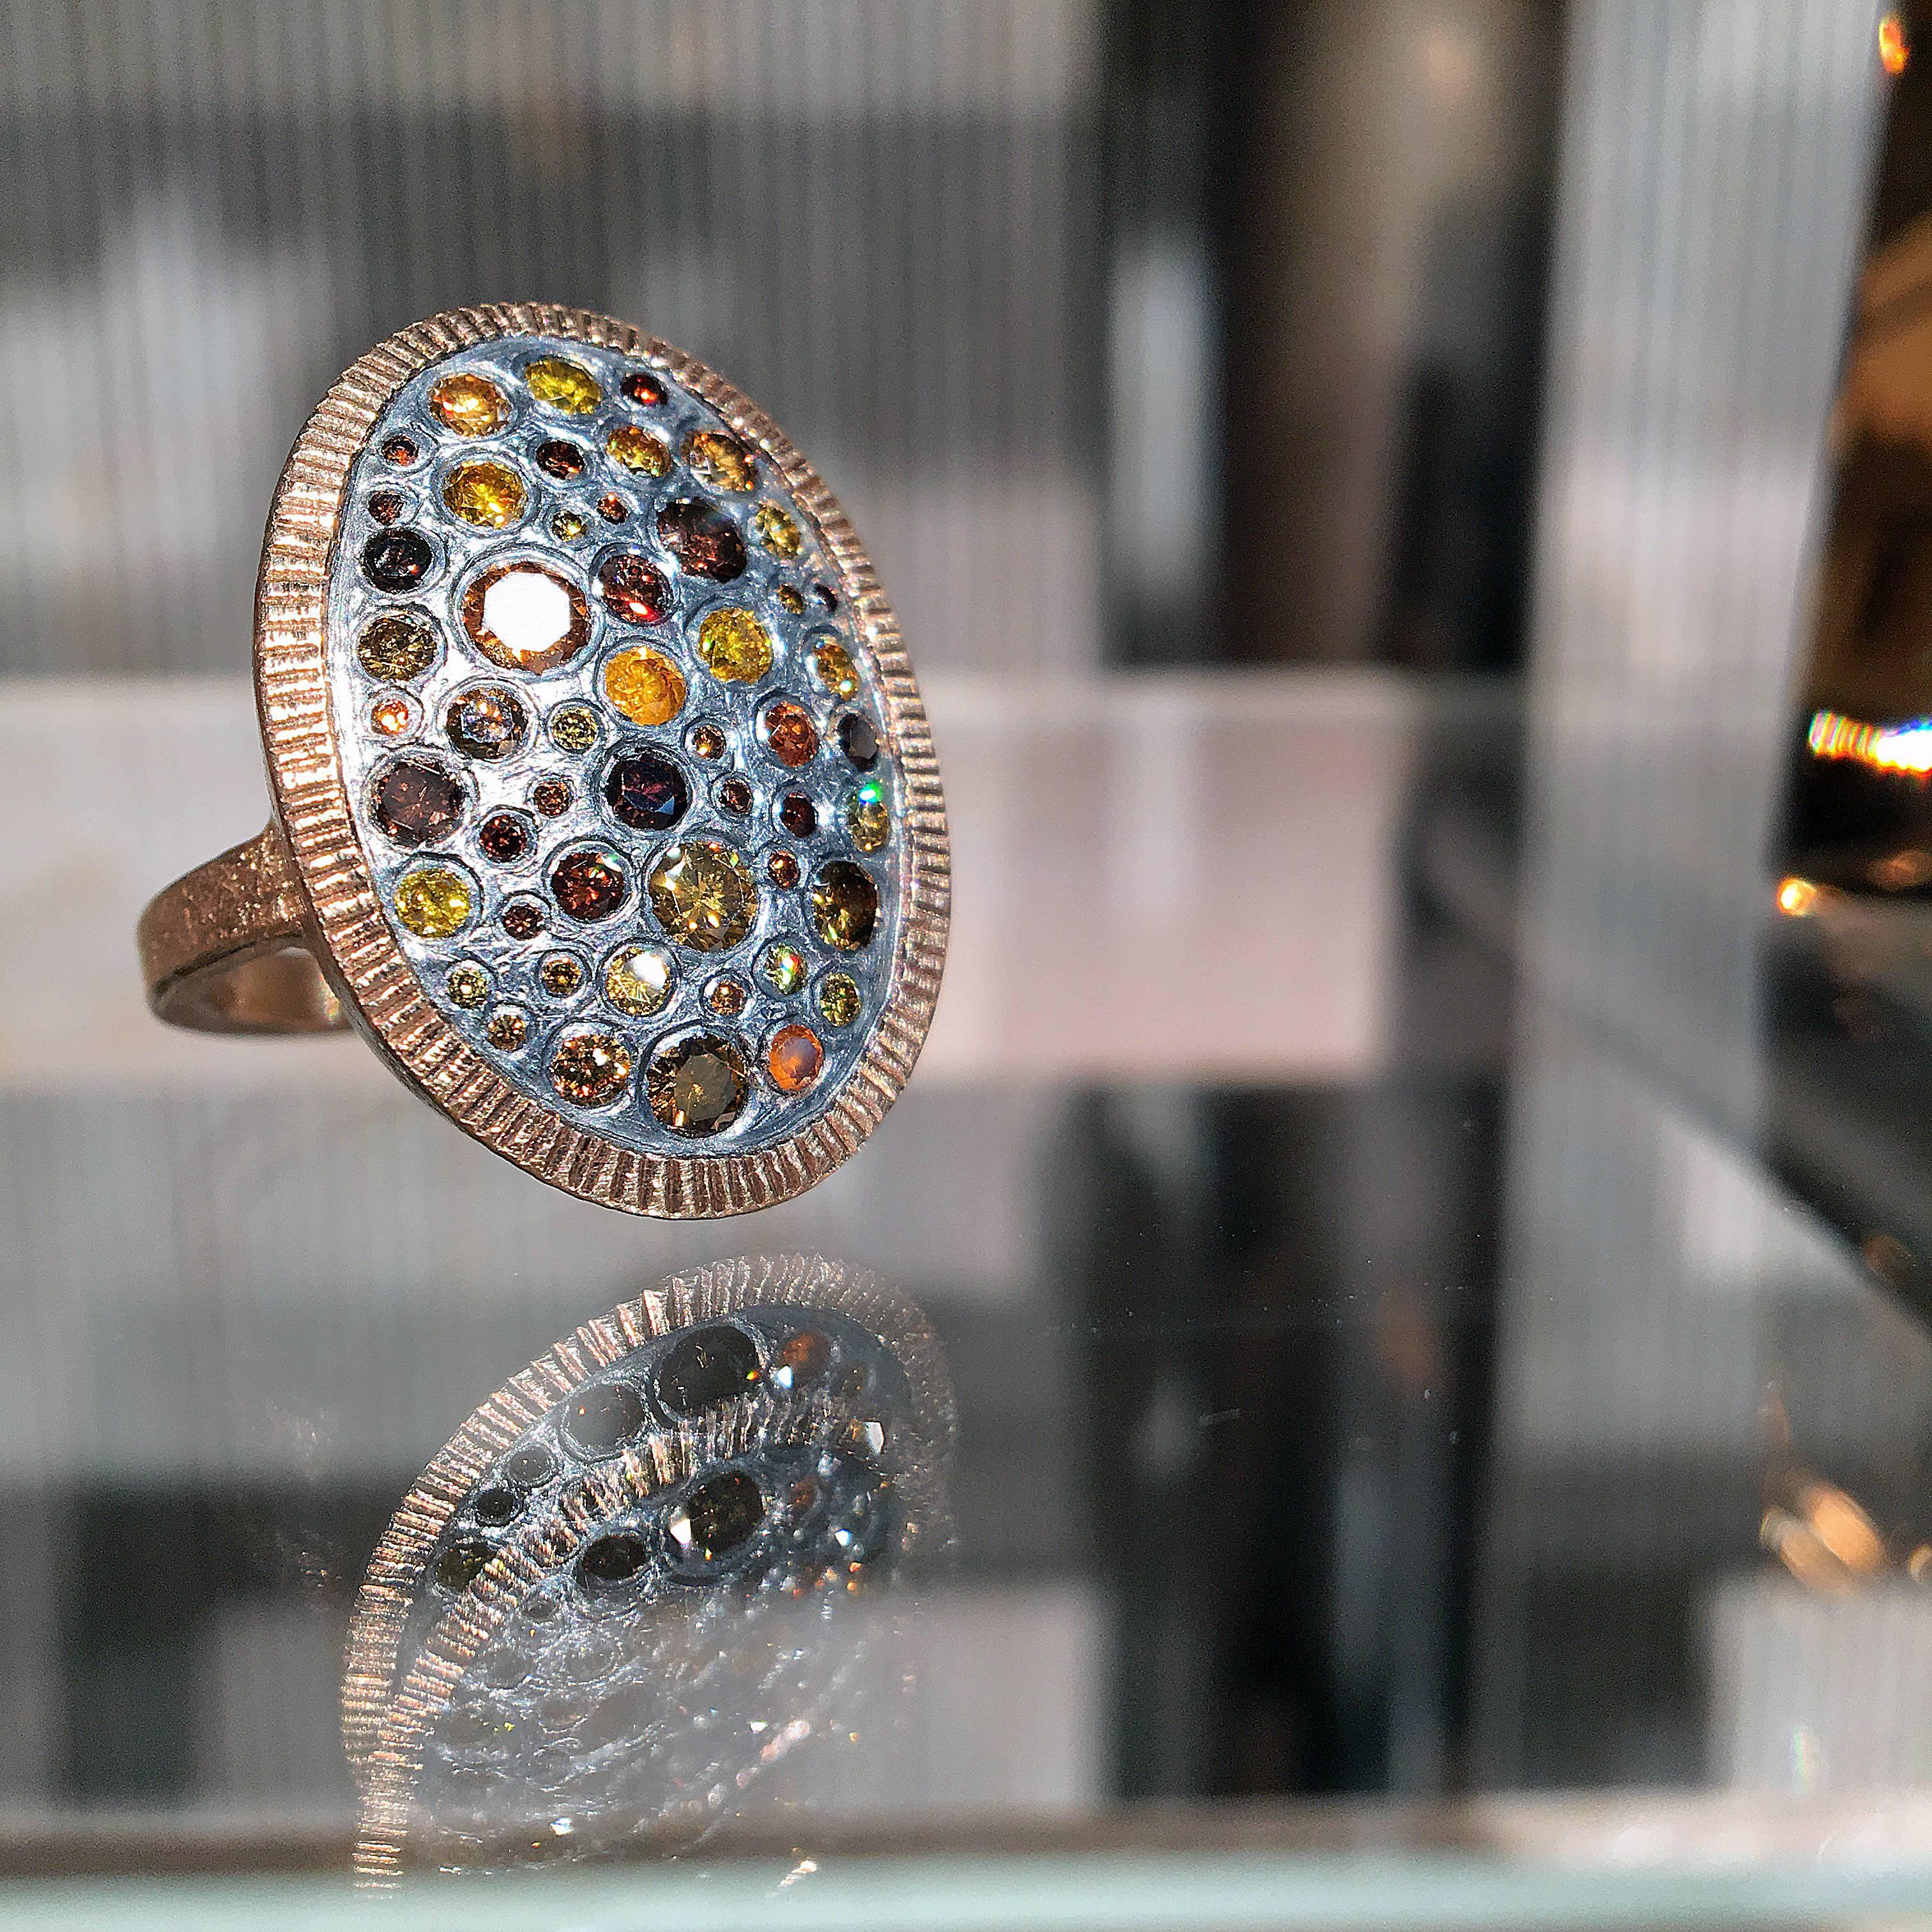 One of a Kind Scattered Multi Diamond Ring by acclaimed jewelry artist Todd Reed handcrafted in highly-textured 18k rose gold featuring 1.38 total carats of round brilliant-cut  Autumn Diamonds™ bezel-set in patina-finished sterling silver. Size 6.5